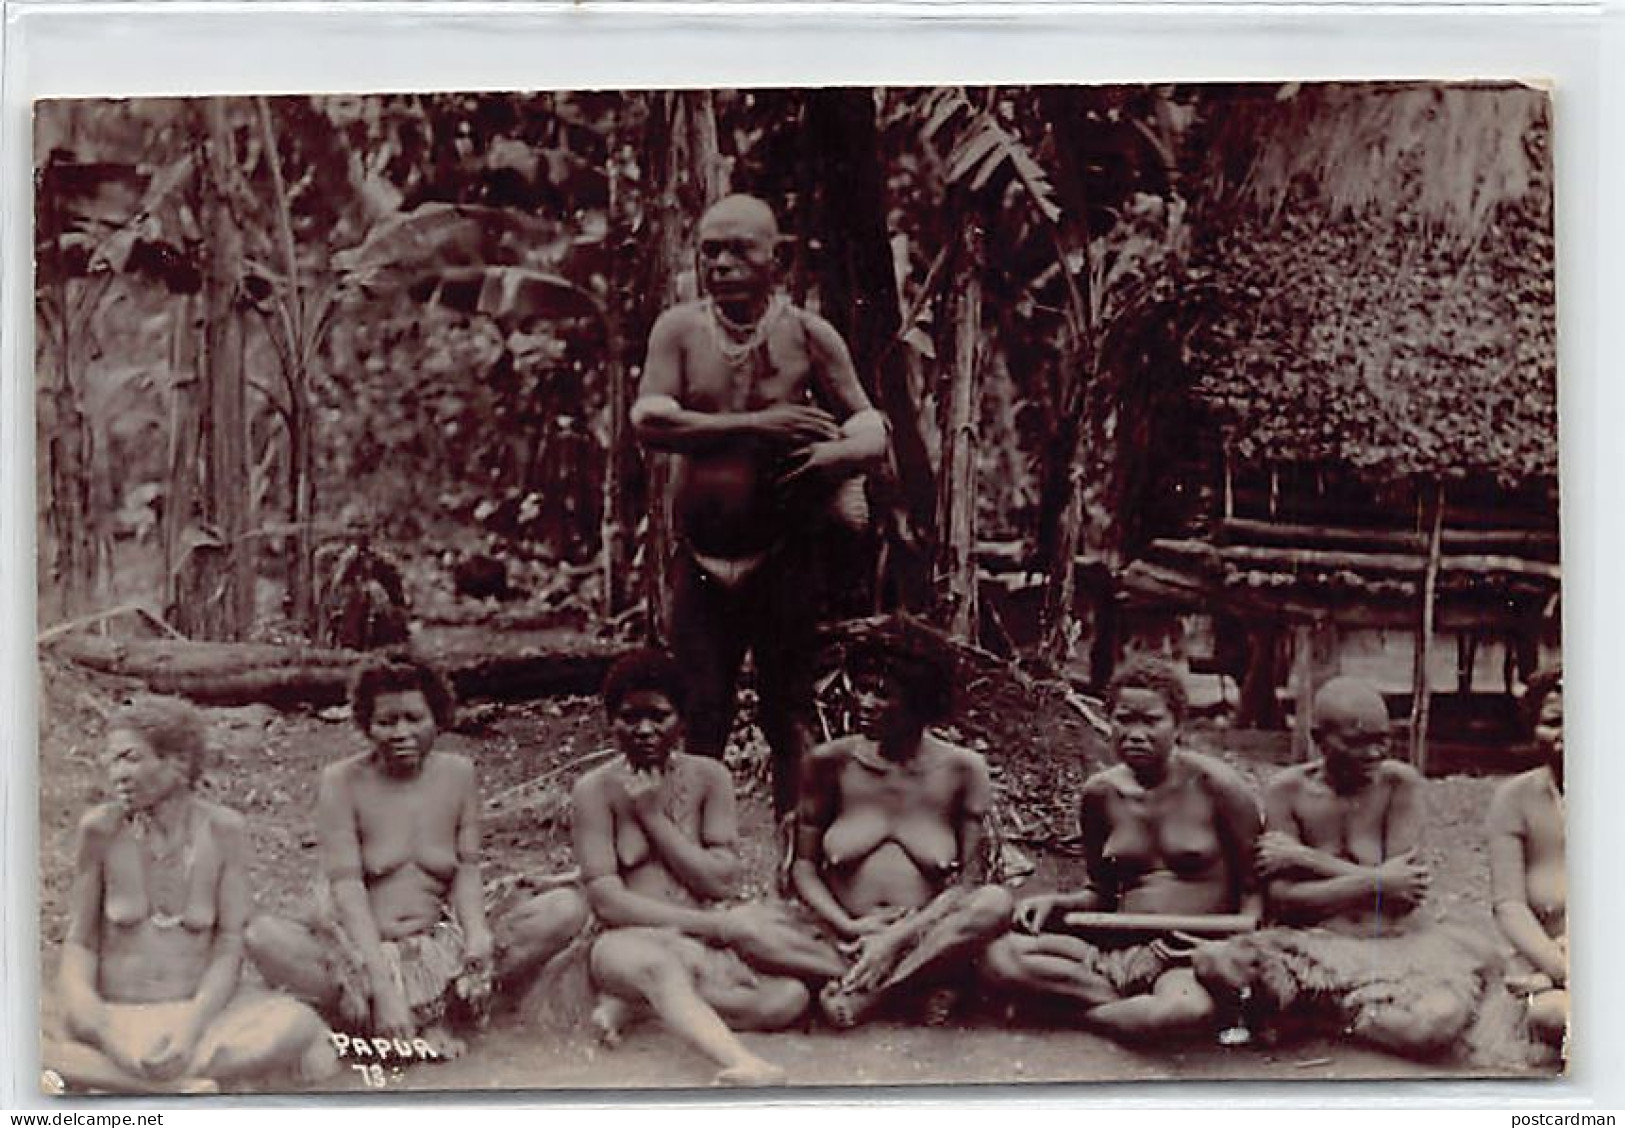 PAPUA NEW GUINEA - Papuan Chief And His Nude Wives - REAL PHOTO - Publ. W. H. Cooper. - Papouasie-Nouvelle-Guinée